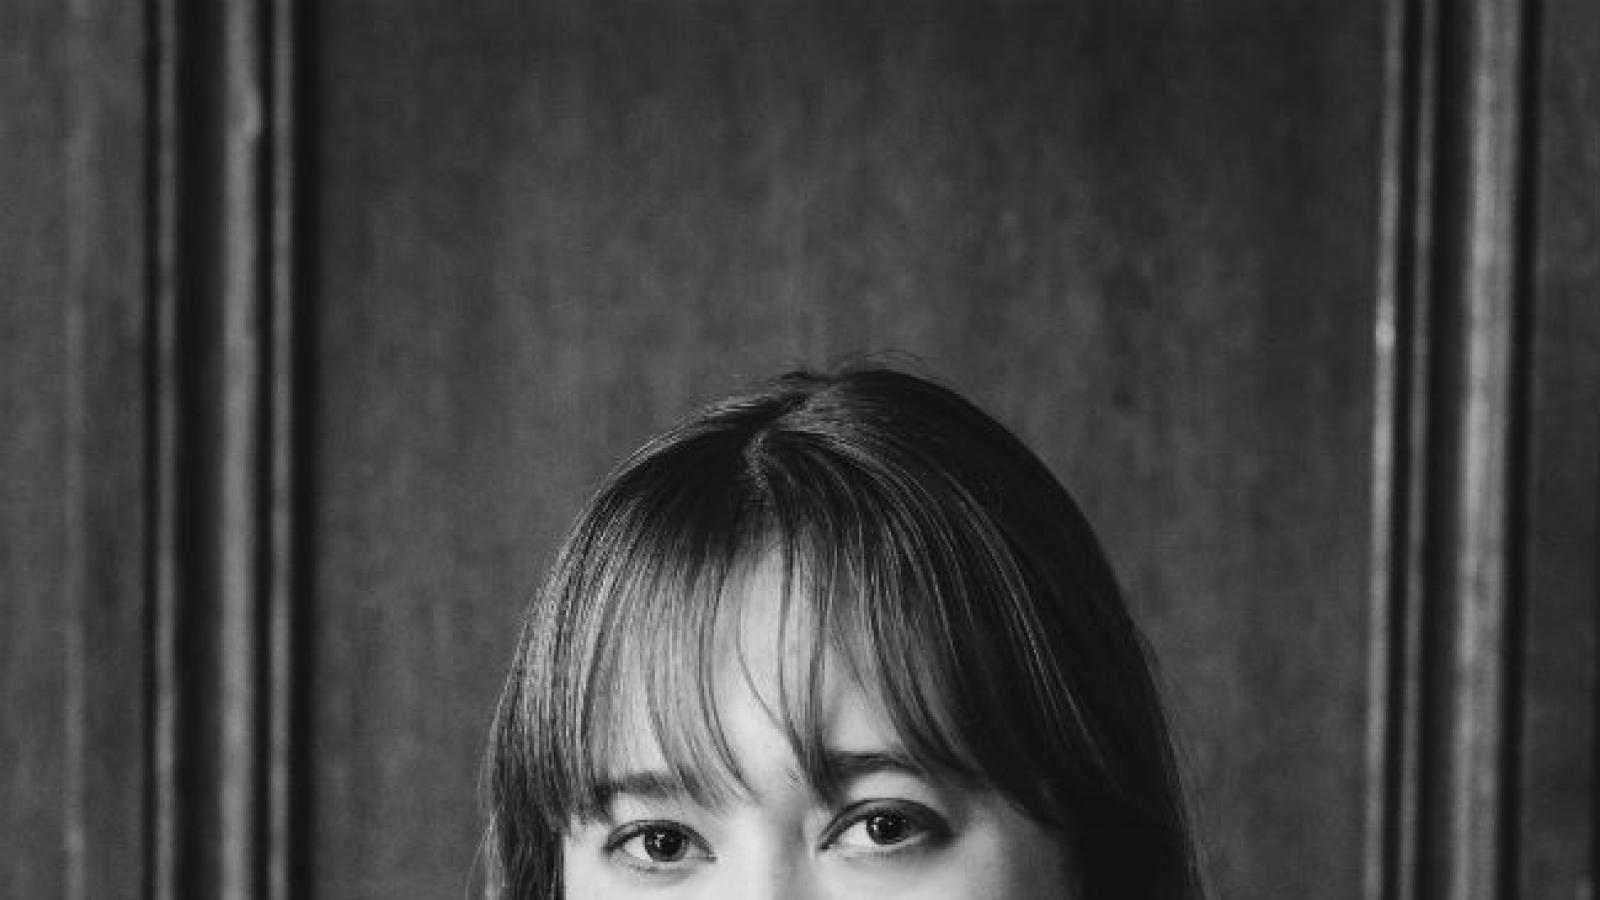 Black and white photo of woman with bangs